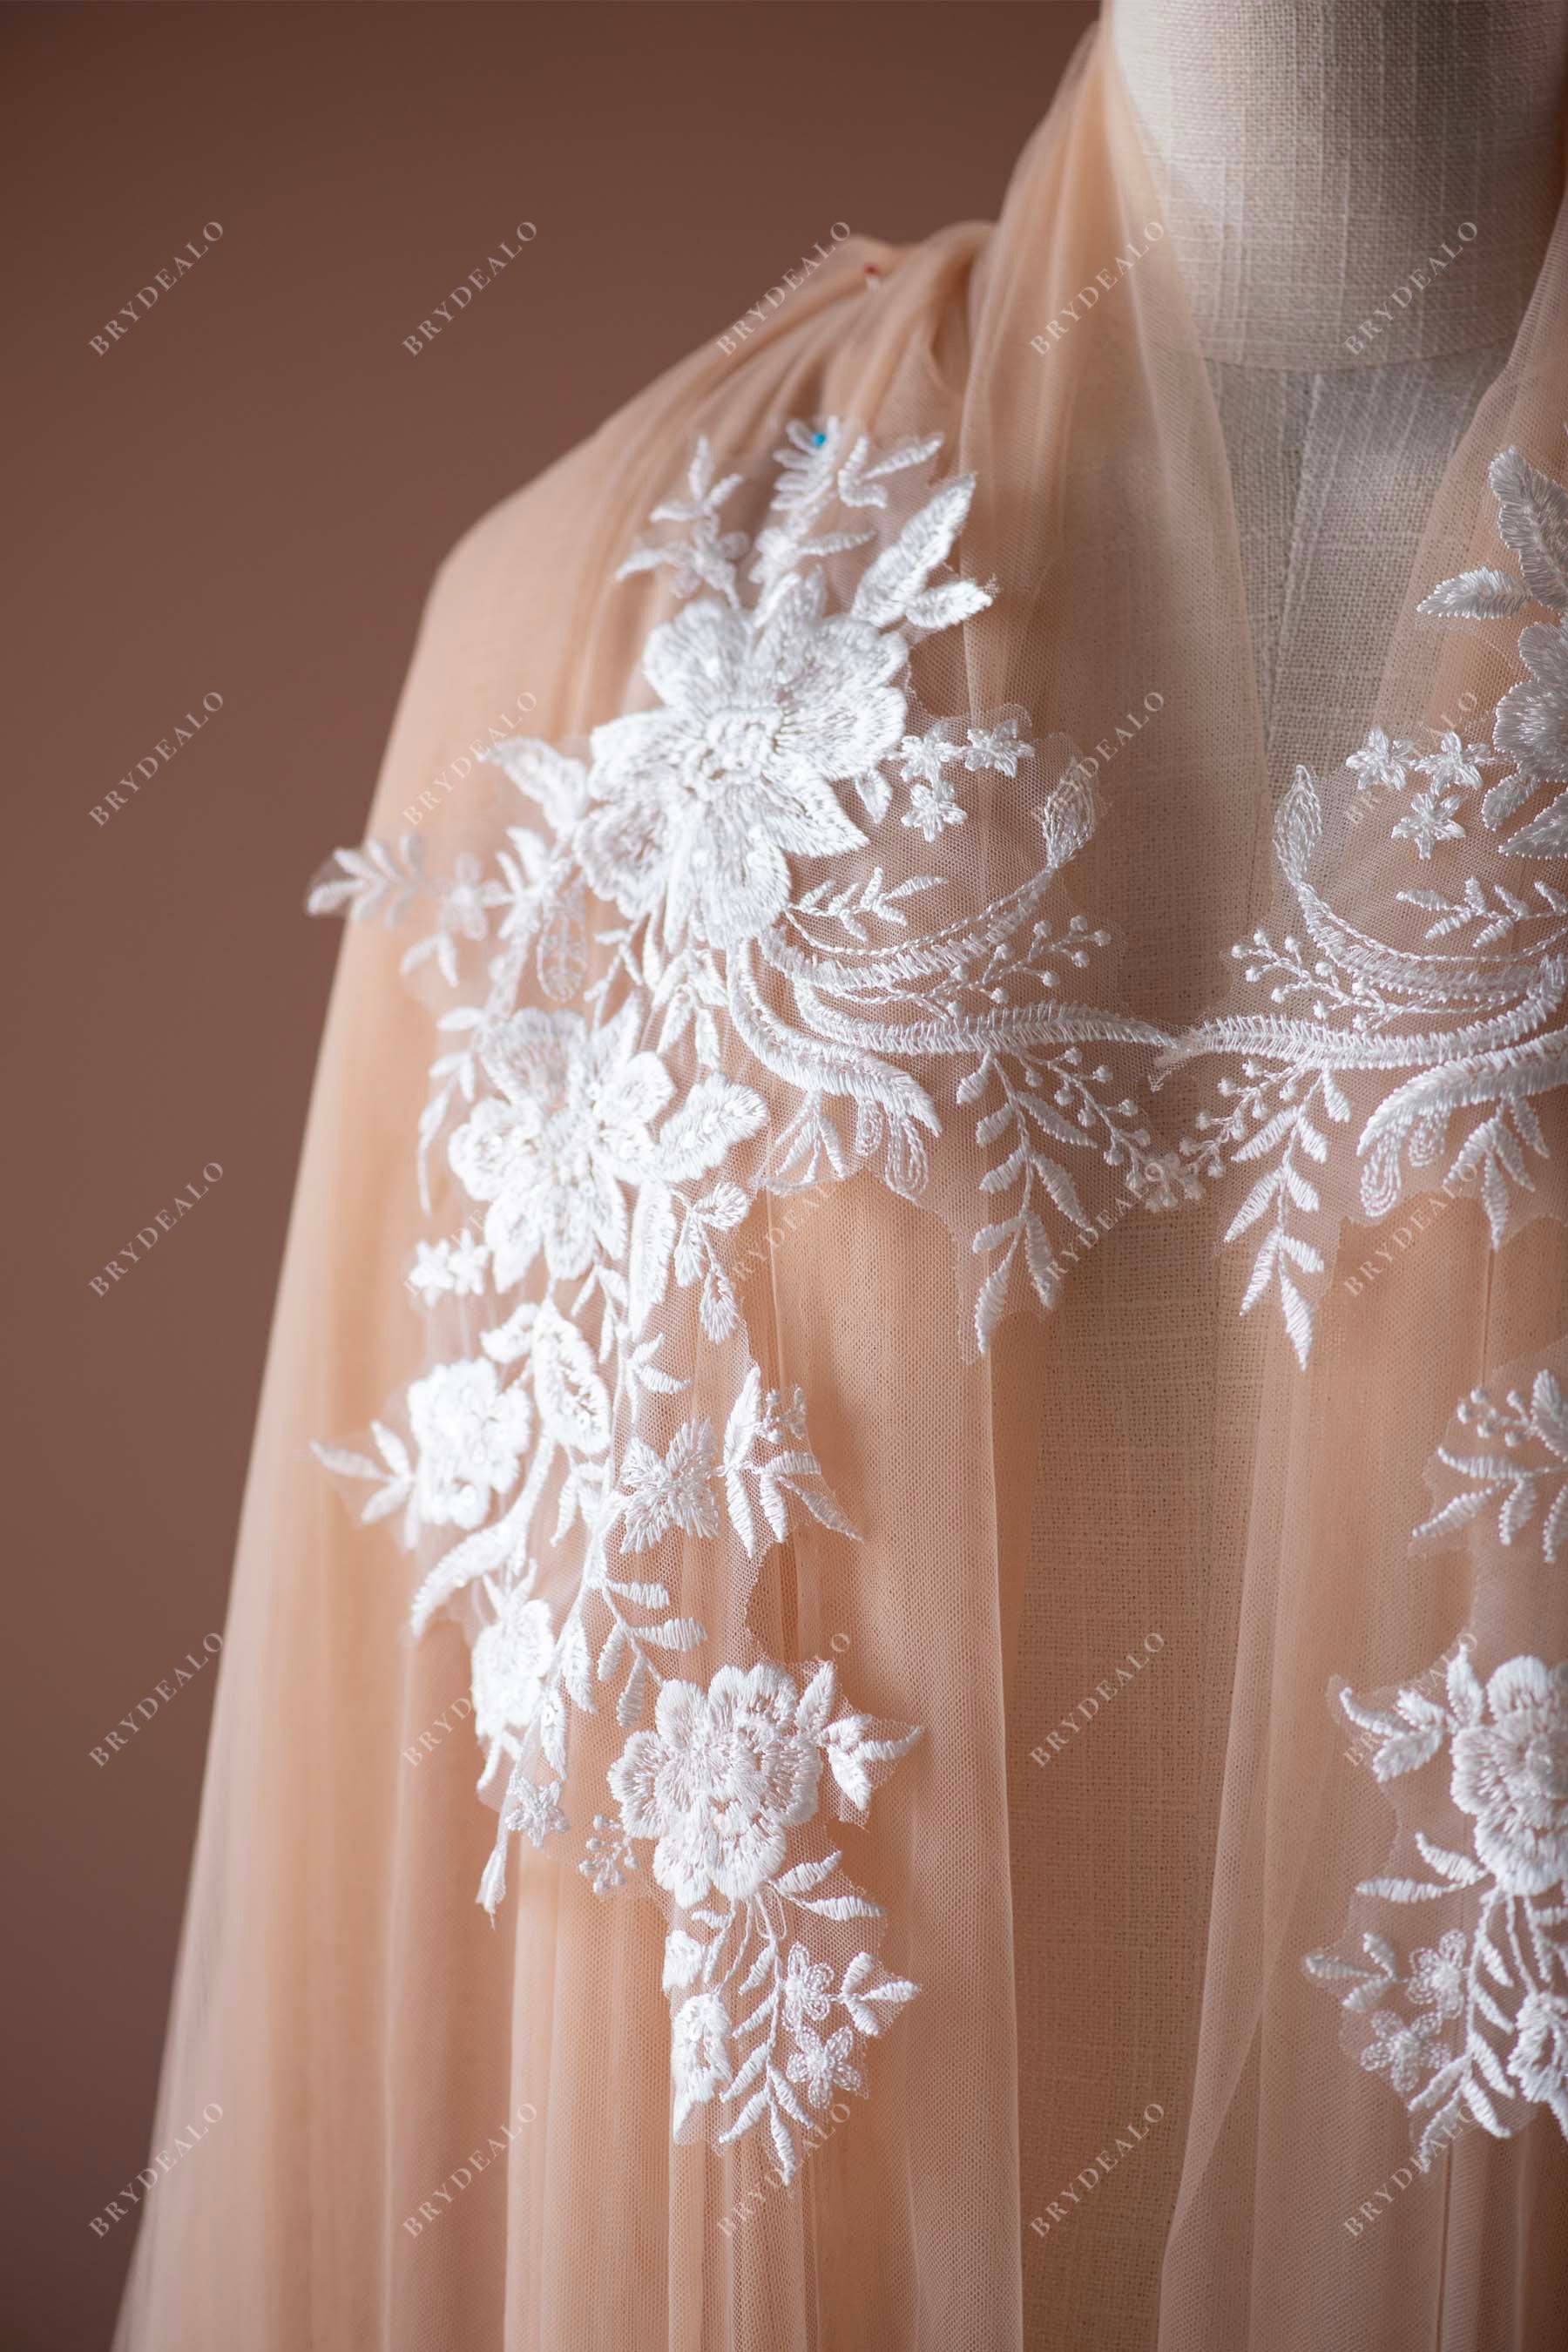 shimmery flower bridal lace appliques for wedding gown